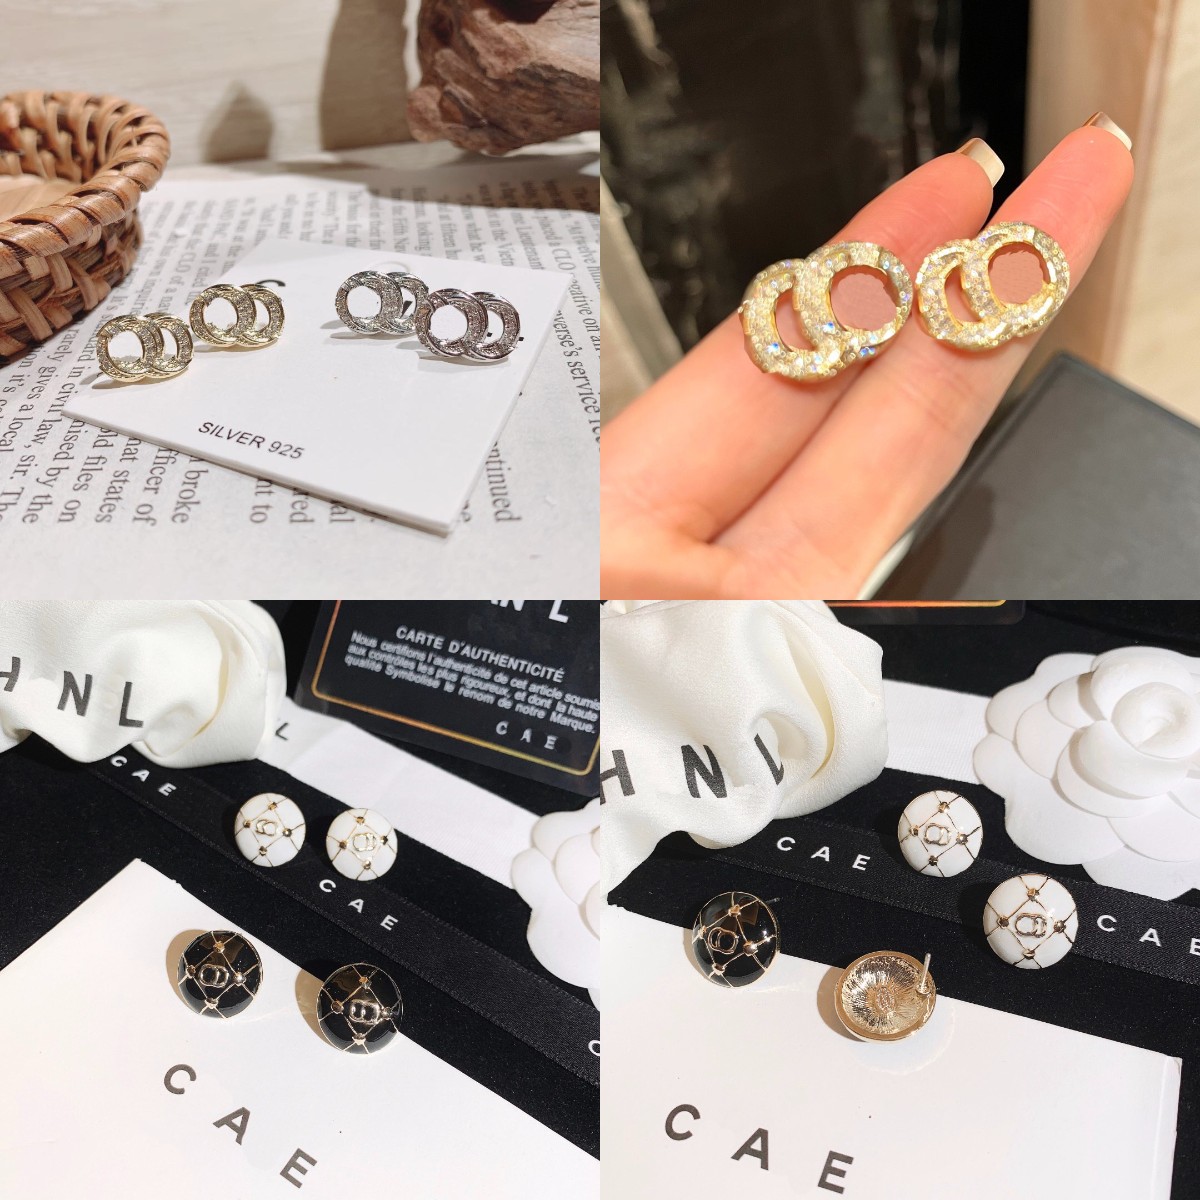 Luxury High-end Jewelry Earrings Delicate Charm Design Earrings Popular Brand Designer Accessories Selected Lovers' Family Gi272S